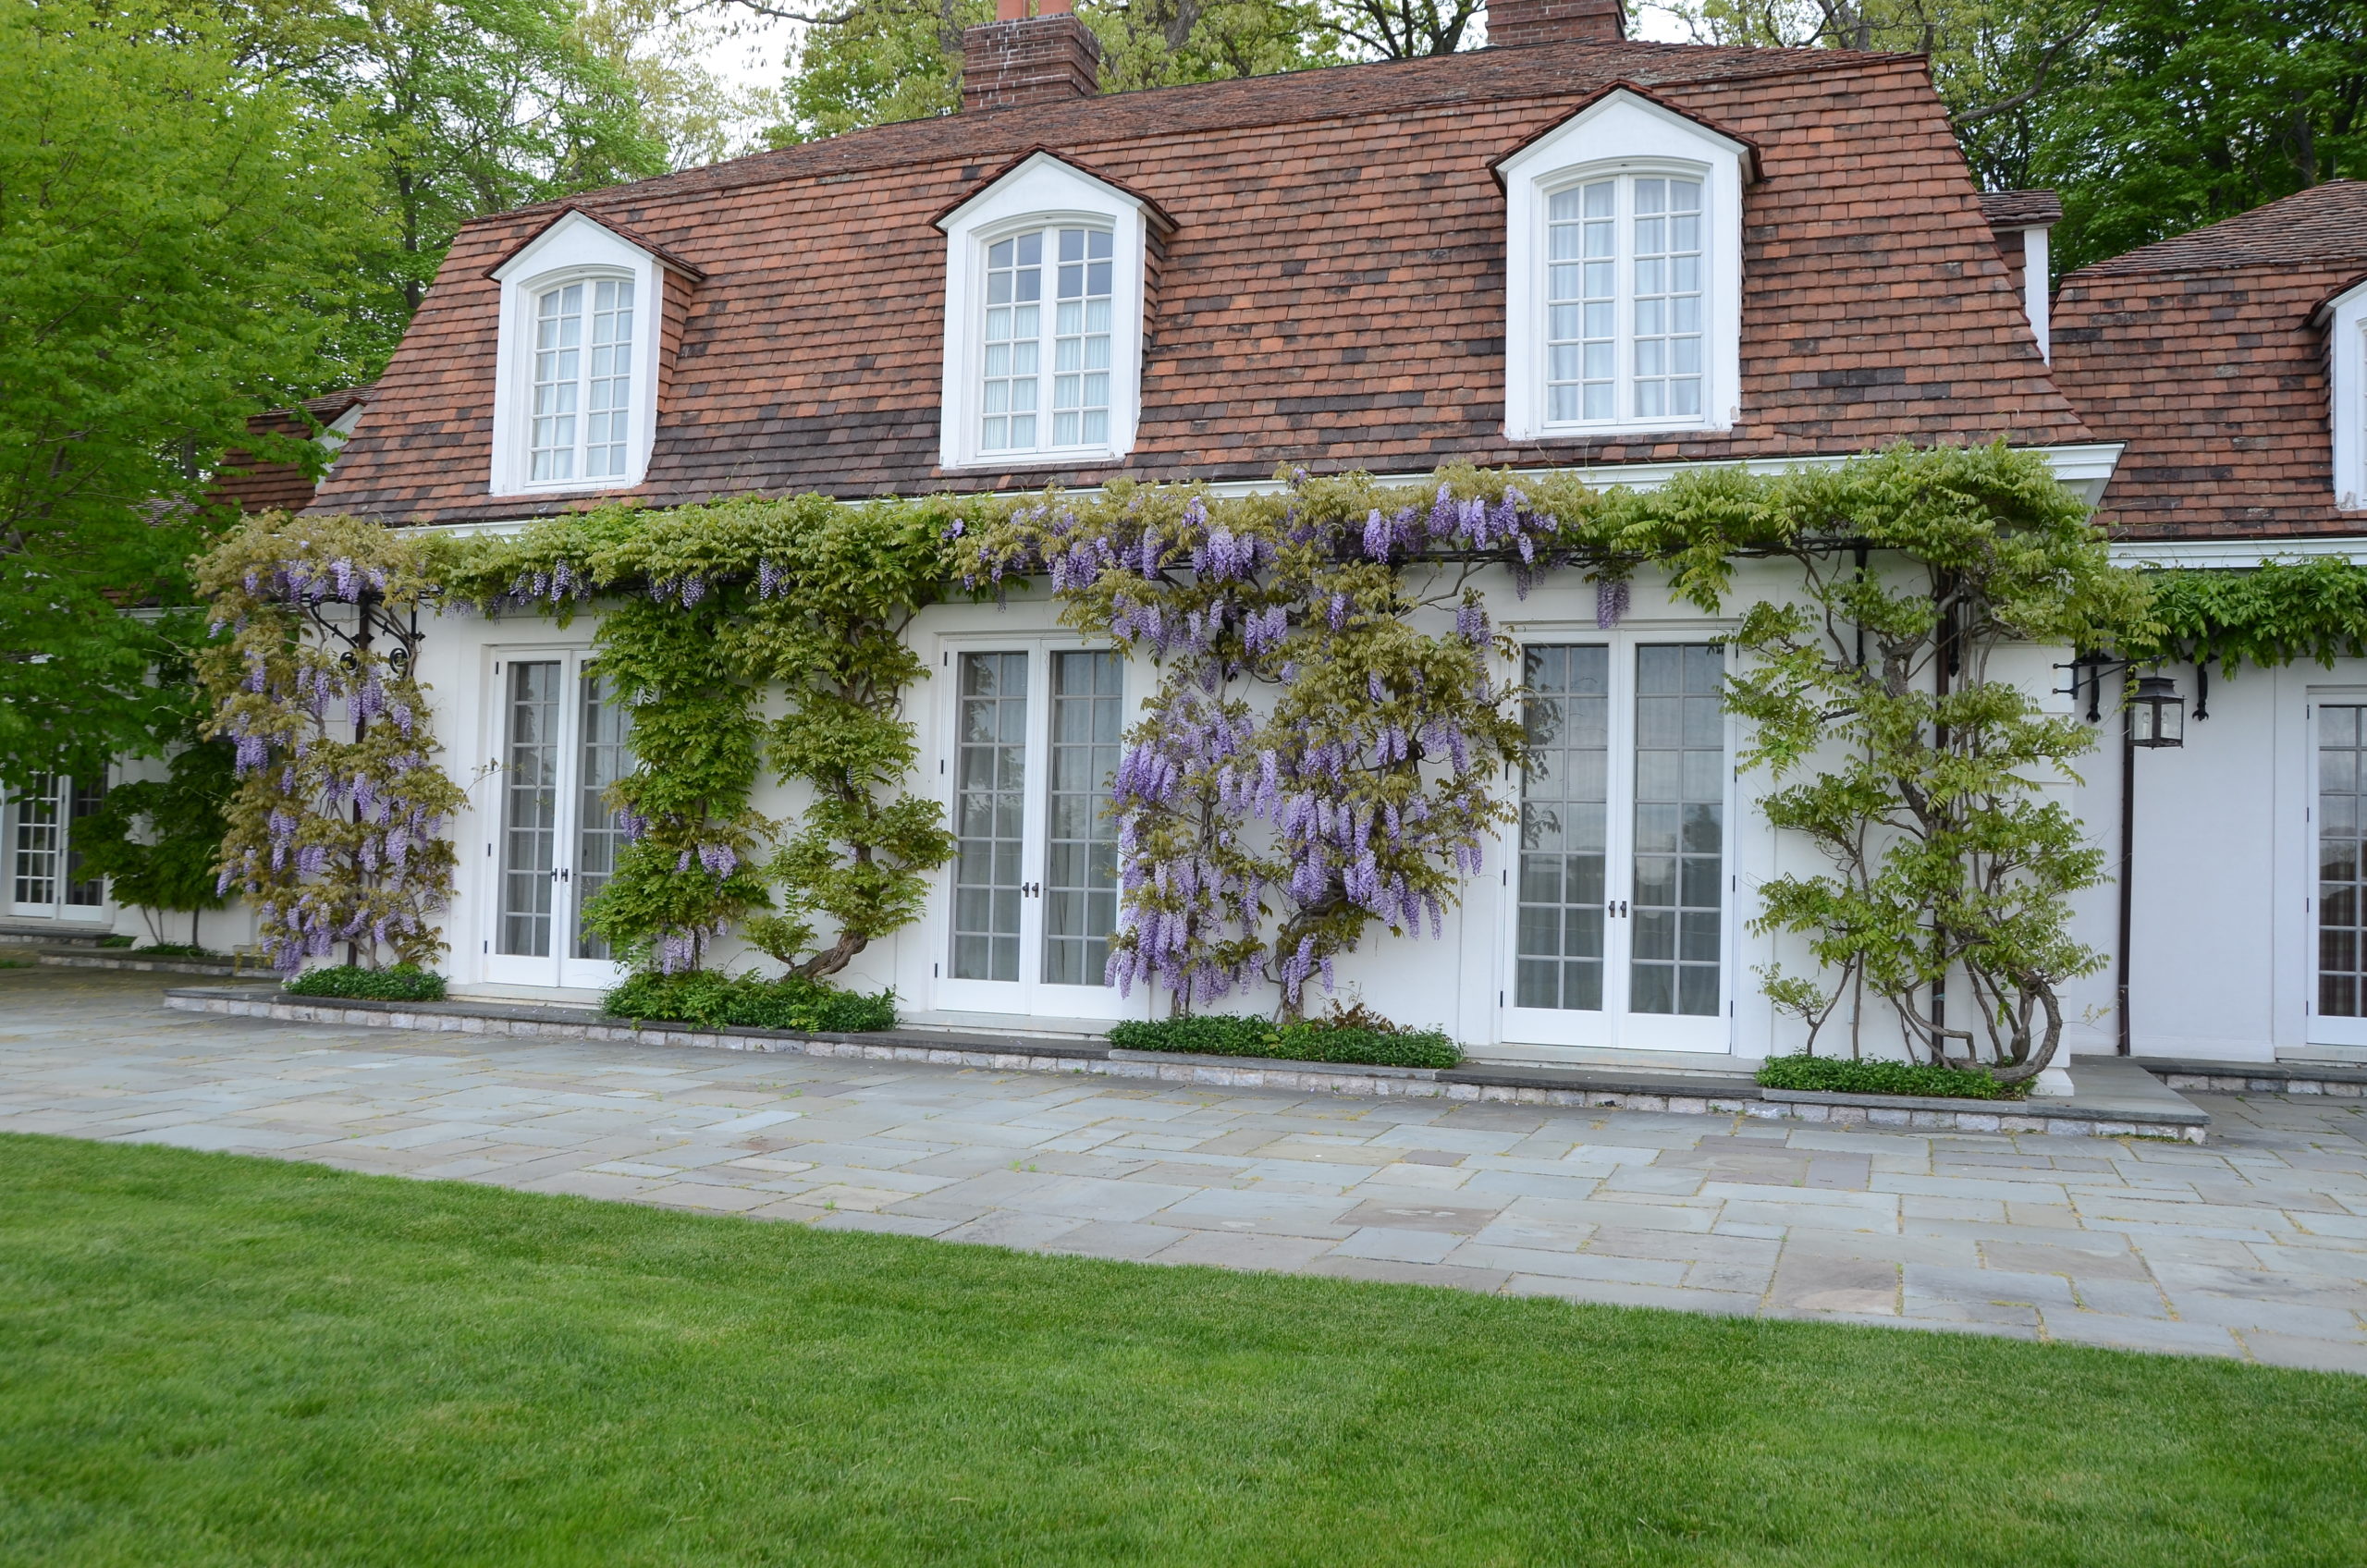 This building was constructed around 1928 and fully renovated in 2001, which added two new wisterias to the original pair. Above the doors, a massive steel structure runs the length of the house to support the heavy vines. If they are not regularly pruned, they would easily find their way in through the doors and second-story windows. ANDREW MESSINGER